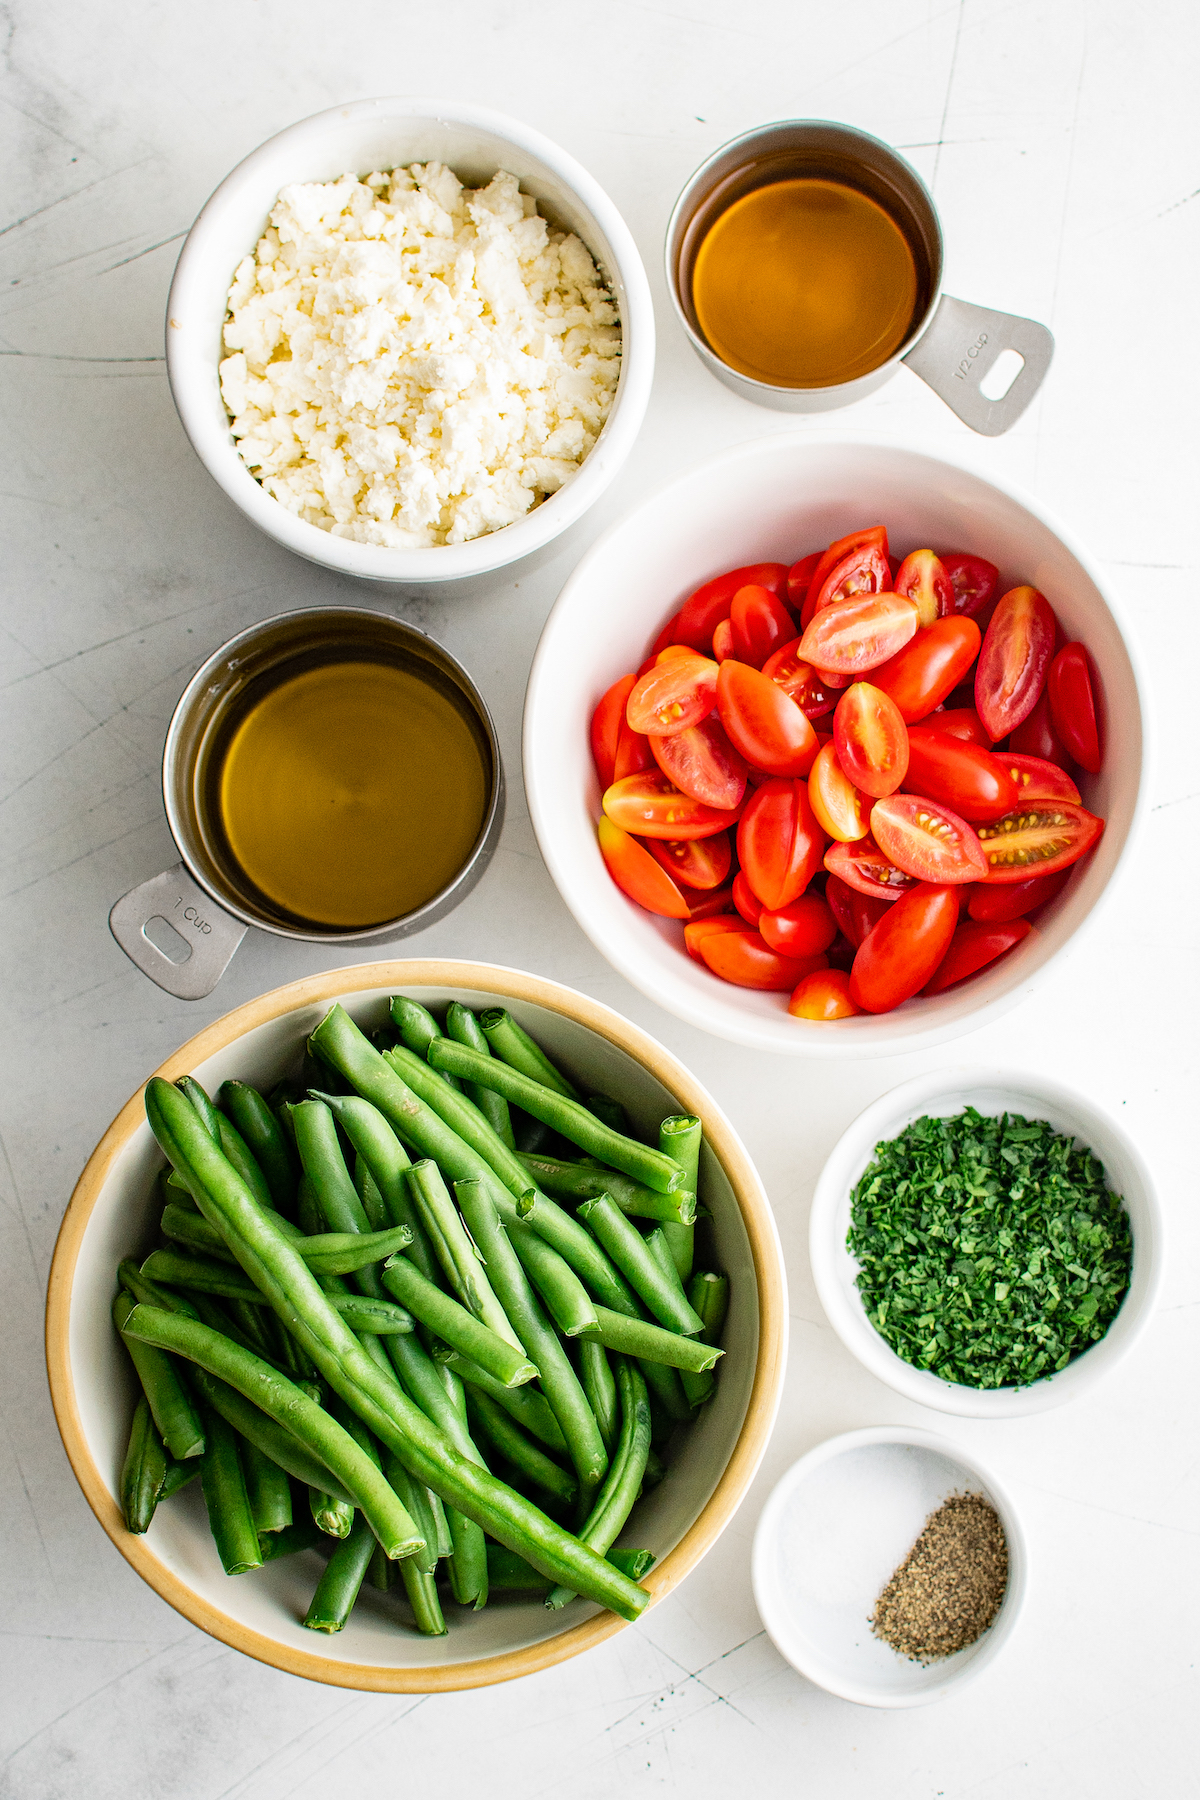 ingredients in prep bowls to make green bean salad, like green beans, grape tomatoes, feta cheese, olive oil, and parsley